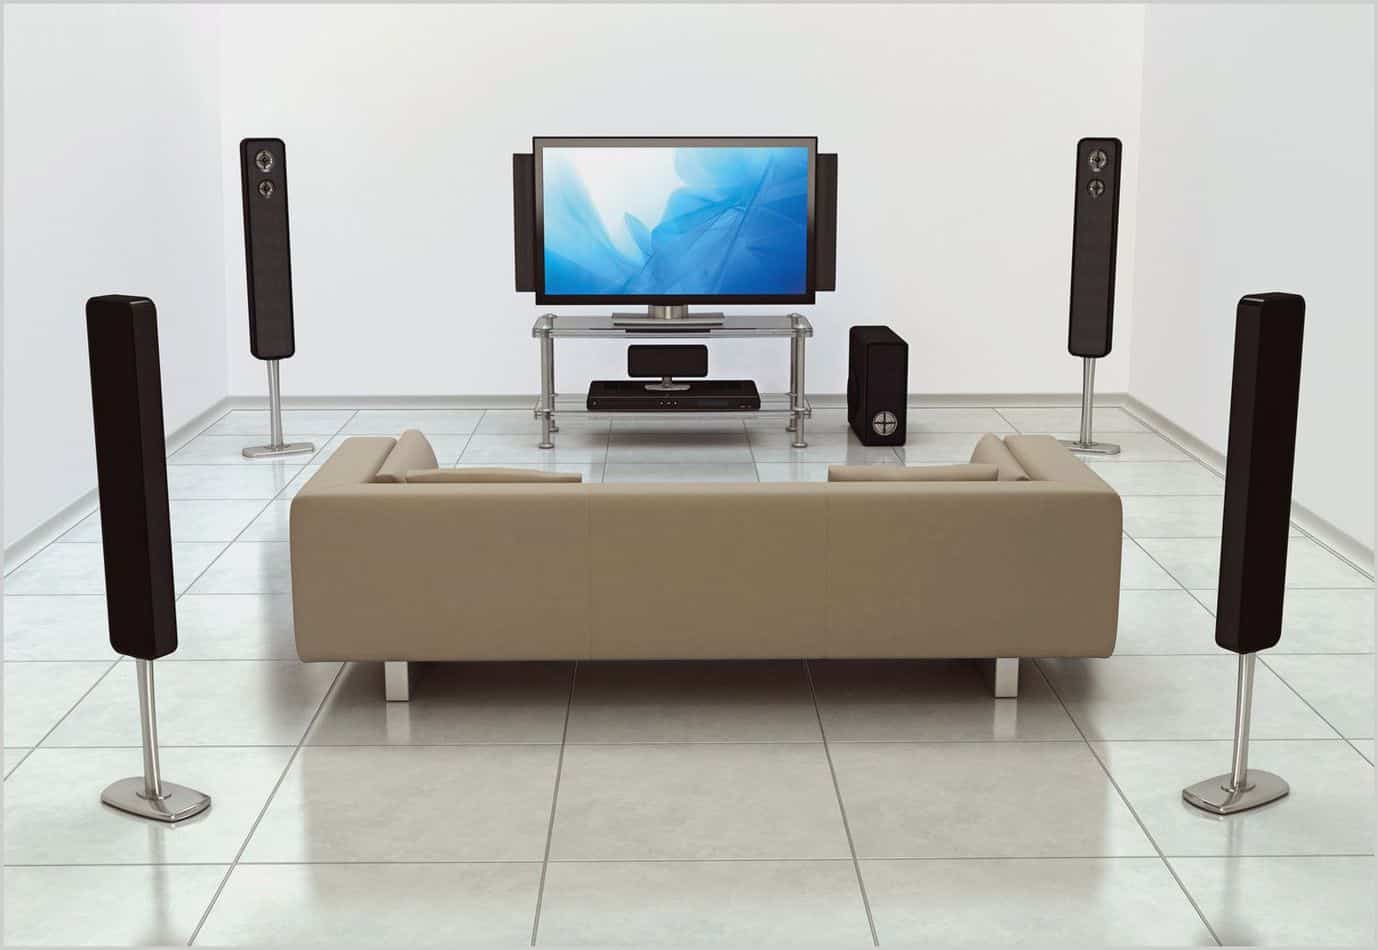 Are Home Theatre Systems Good For Music? - Audioaural